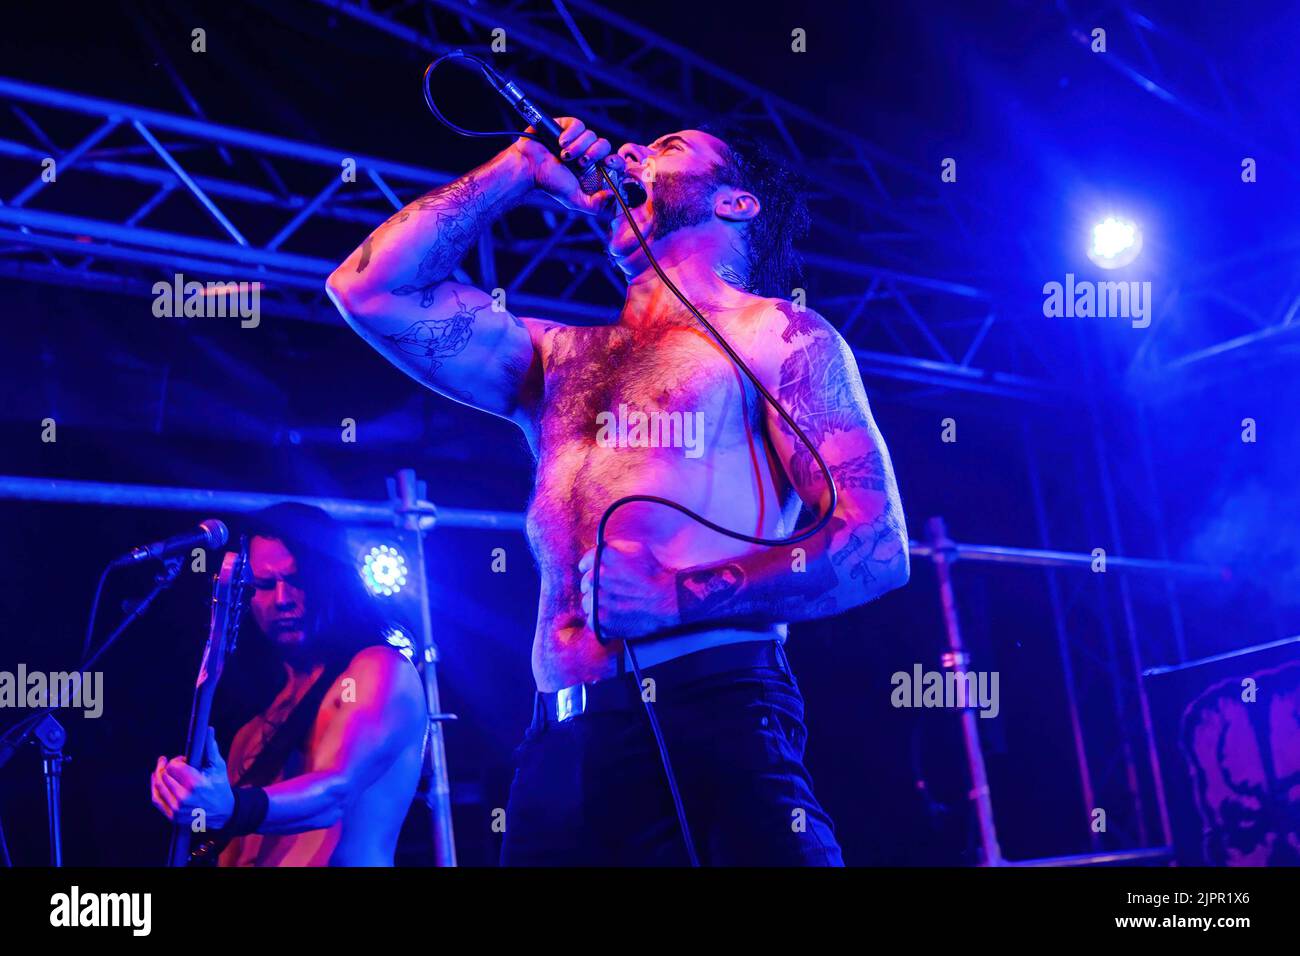 Milano, Italy. 19th Aug, 2022. Alex Story singer of Doyle from Misfits performs live during a concert at Circolo Magnolia. Doyle Wolfgang von Frankenstein, is an American guitarist best known for his material with the horror punk band the Misfits and his own band eponymously named Doyle. (Photo by Mairo Cinquetti/SOPA Images/Sipa USA) Credit: Sipa USA/Alamy Live News Stock Photo